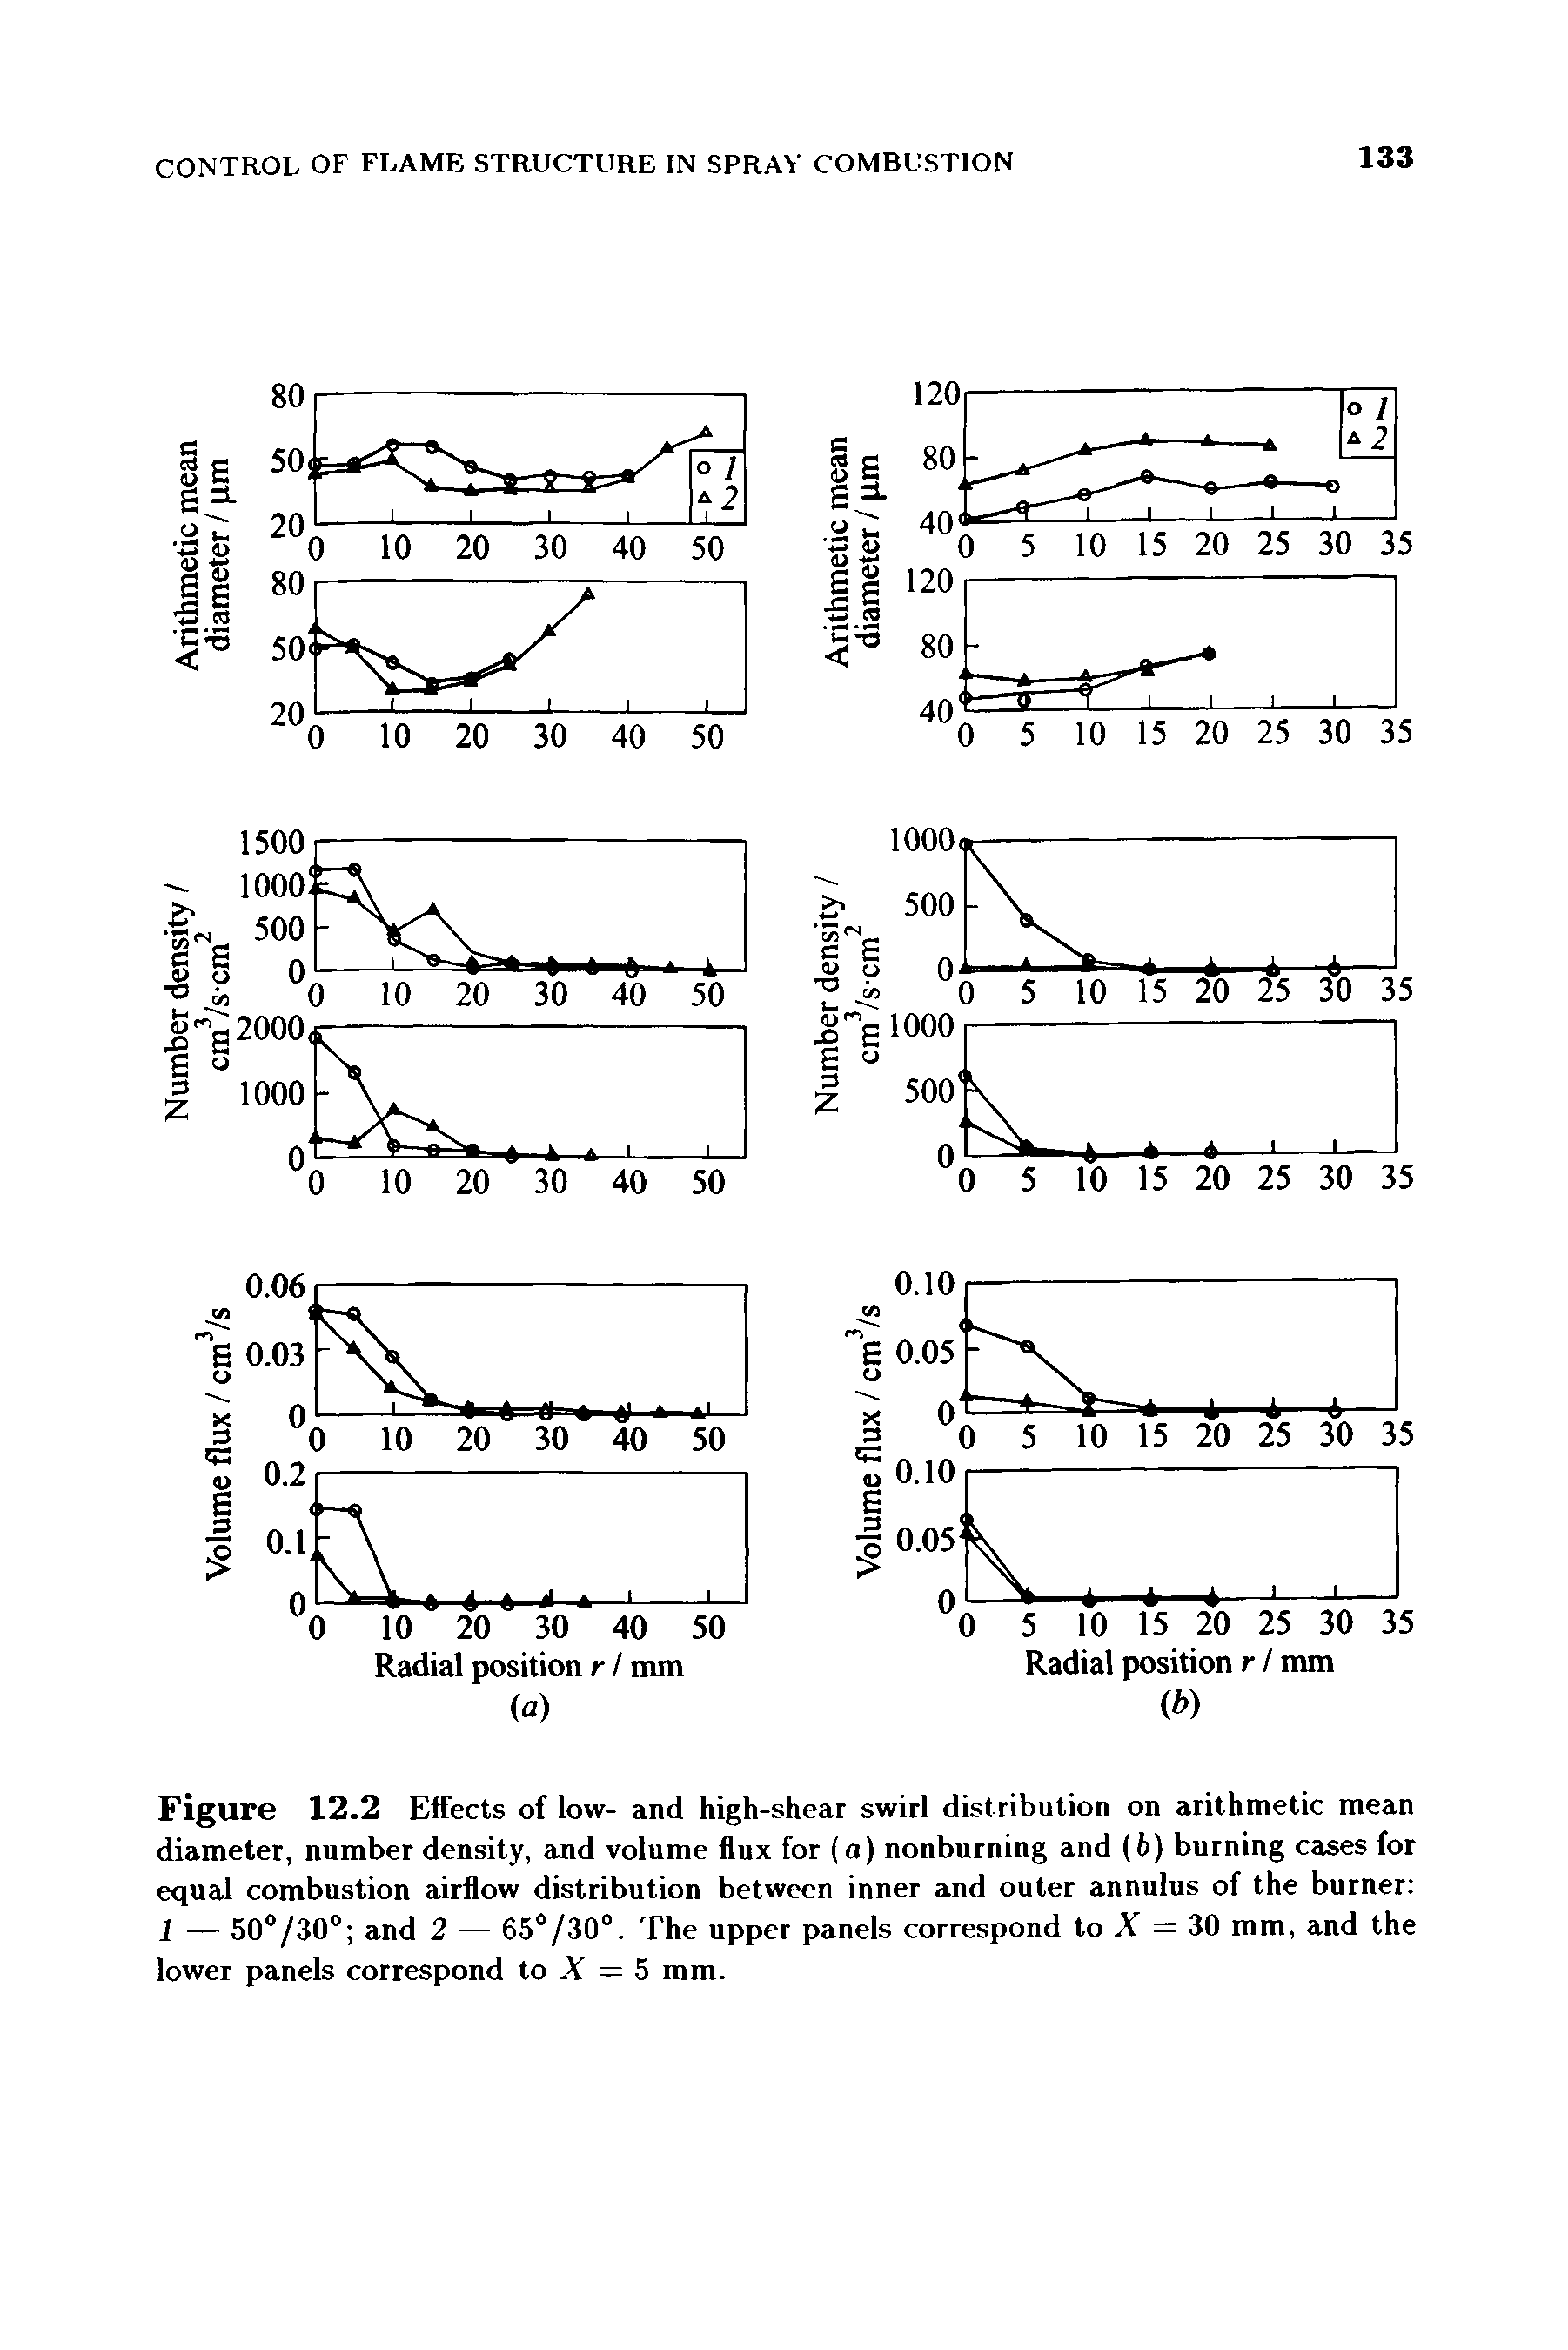 Figure 12.2 Effects of low- and high-shear swirl distribution on arithmetic mean diameter, number density, and volume flux for (a) nonburning and (6) burning cases for equal combustion airflow distribution between inner and outer annulus of the burner 1 — 50°/30° and 2 — 65 /30°. The upper panels correspond to X = 30 mm, and the lower panels correspond to X = 5 mm.